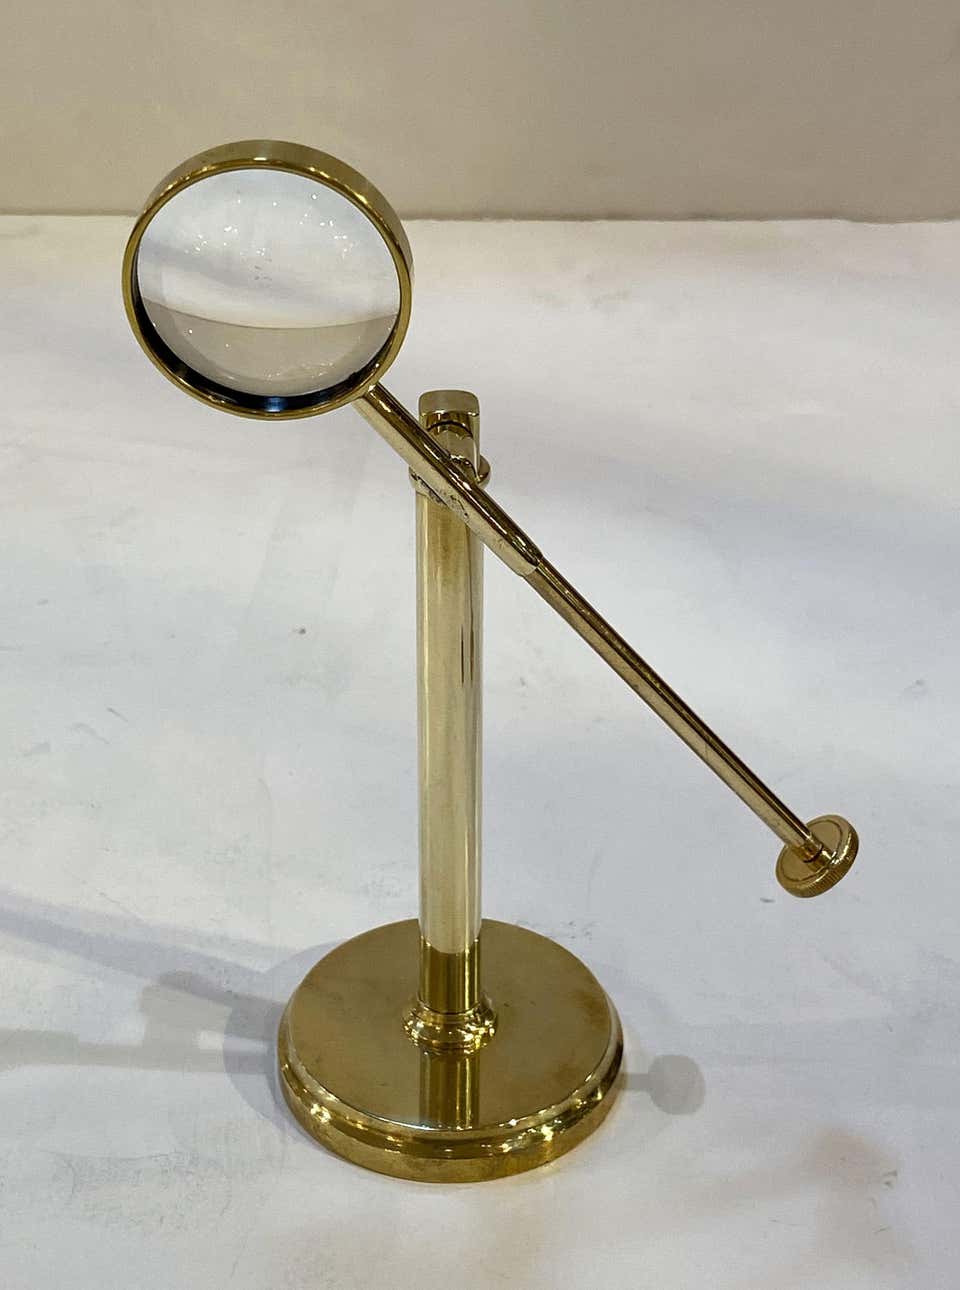 aa895_desk_magnifying_glass_30__master_660179833